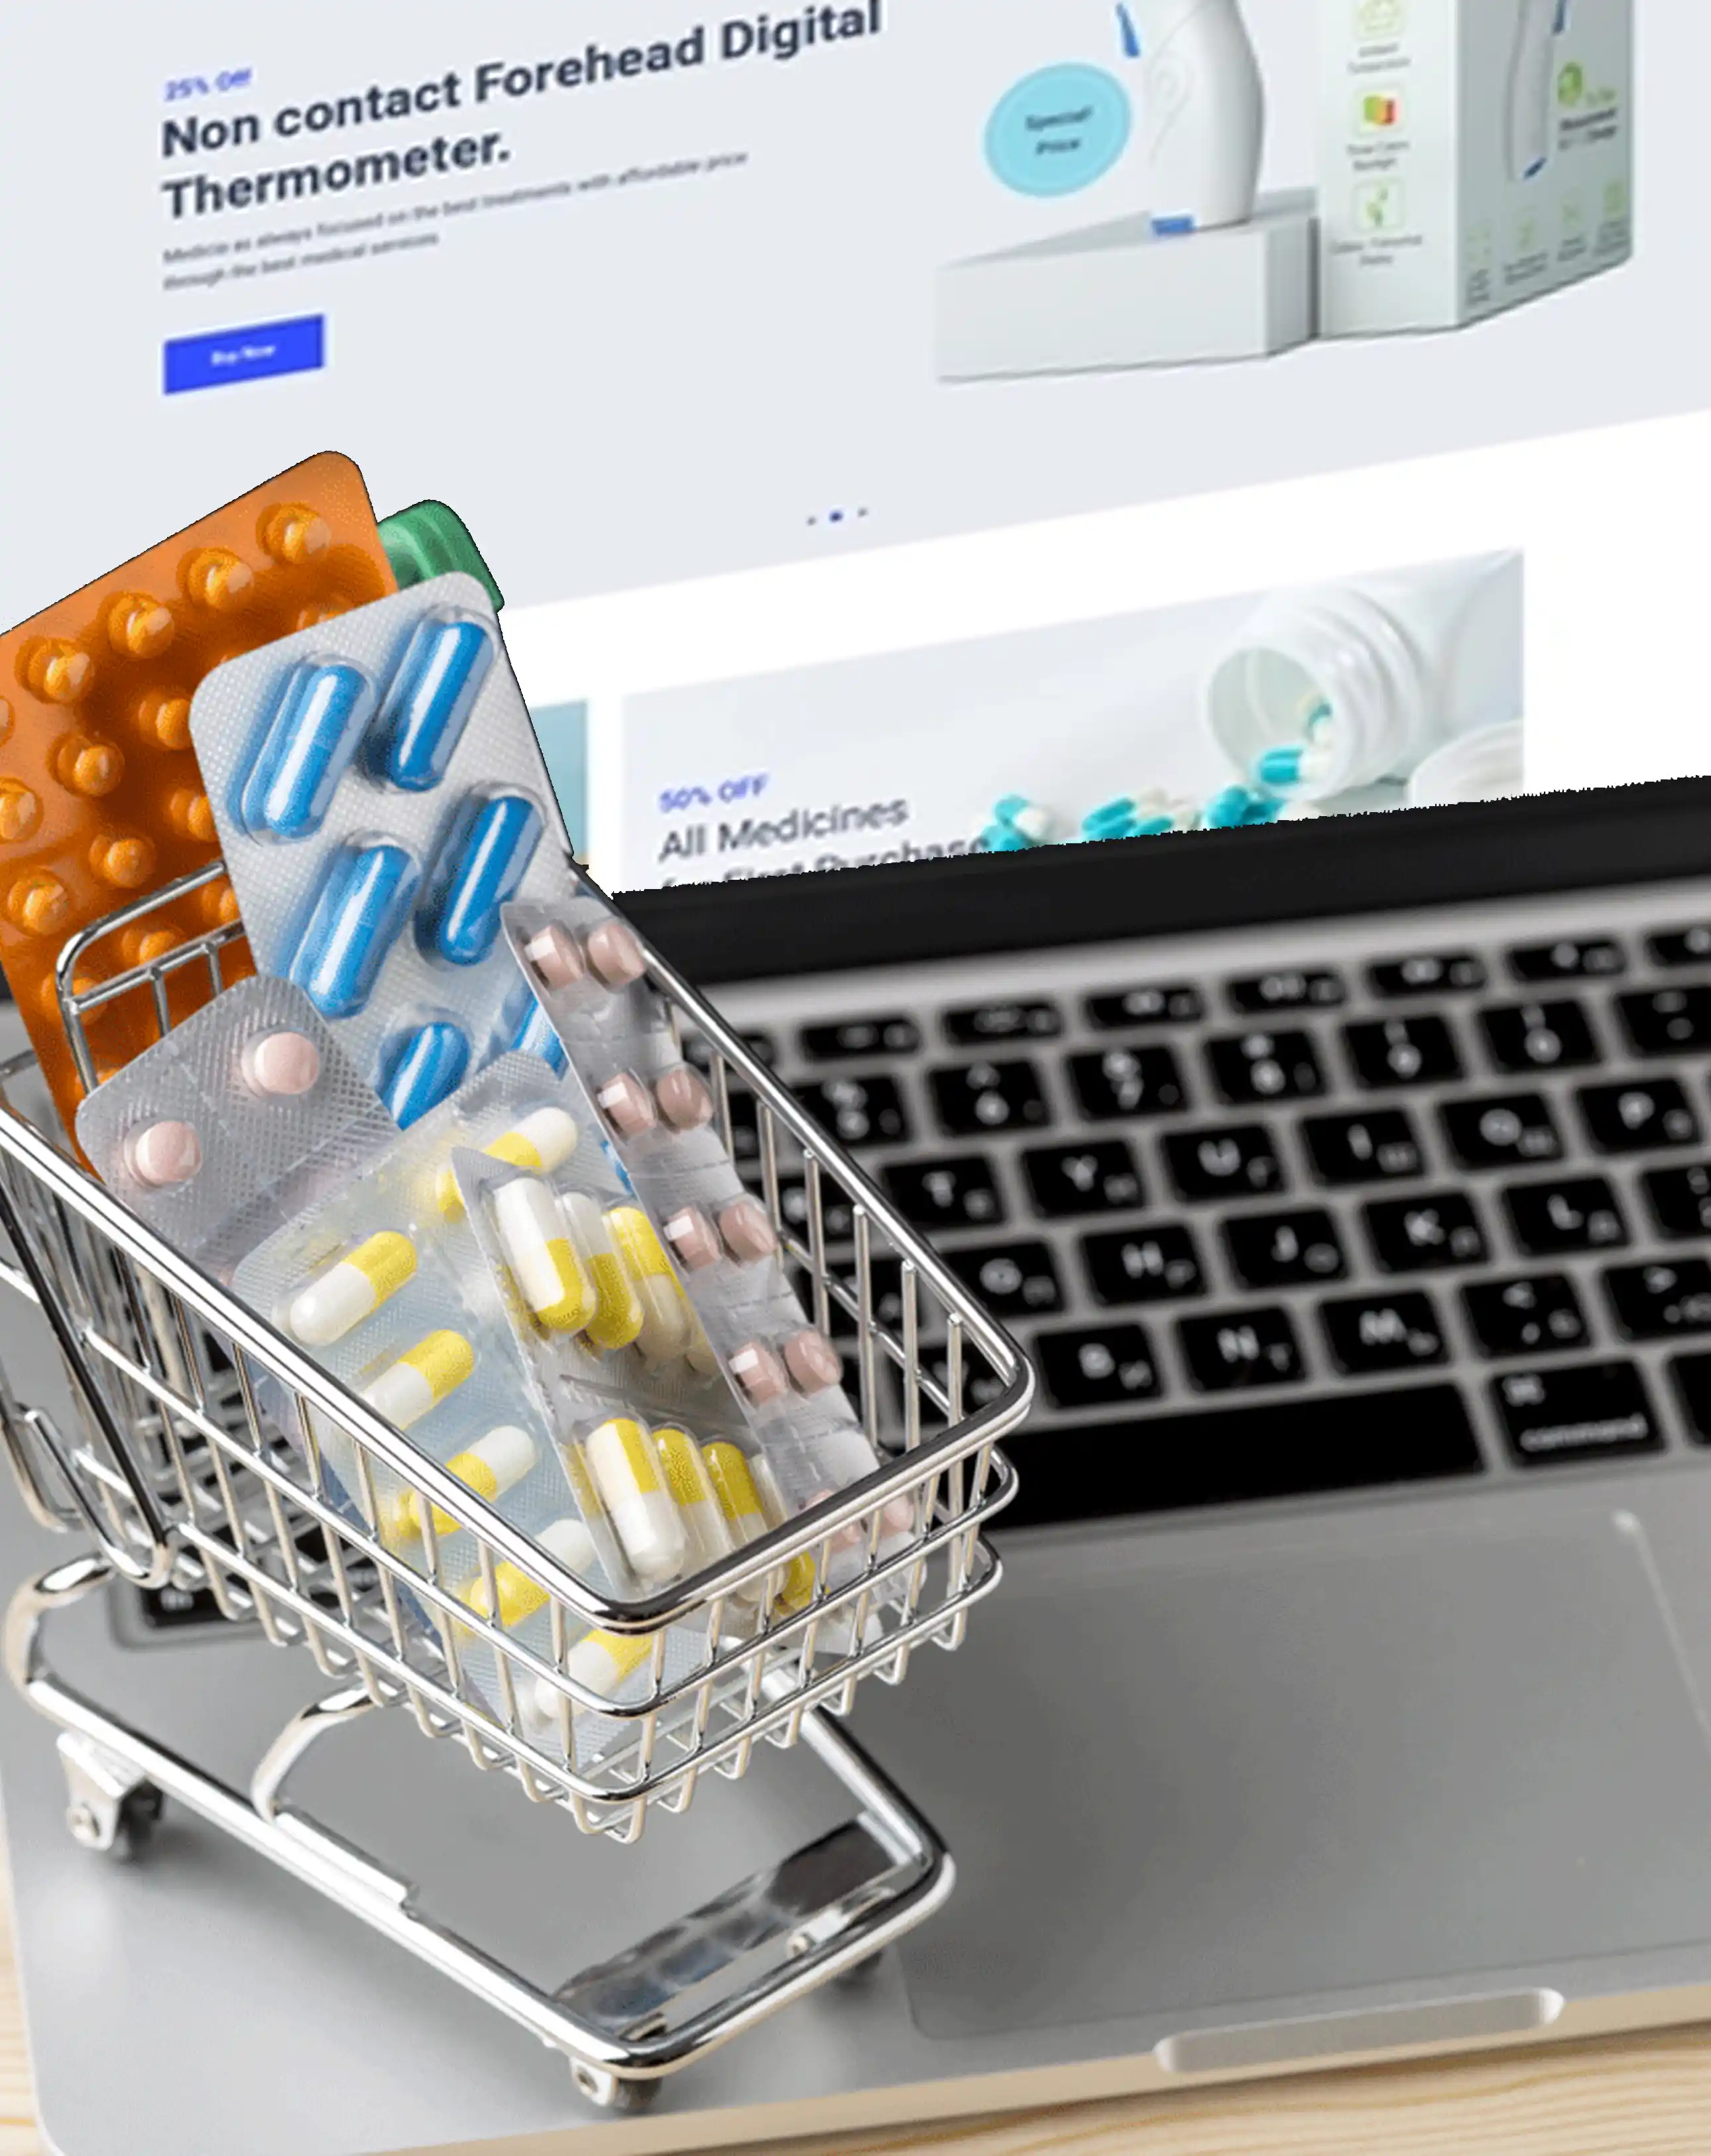 Developed an Indian e-pharmacy platform using Angular to sell medicines online